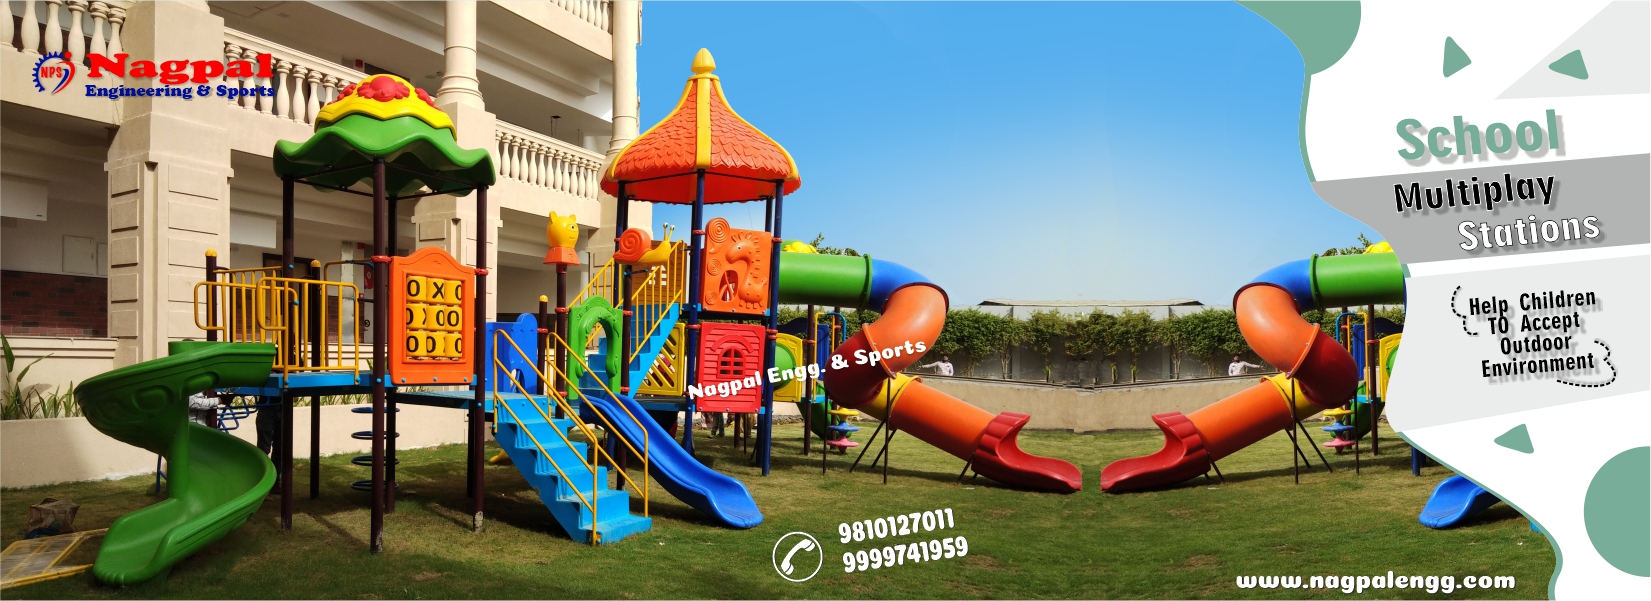 Roto Multiplay System Manufacturers, Exporters & Suppliers in Srinagar